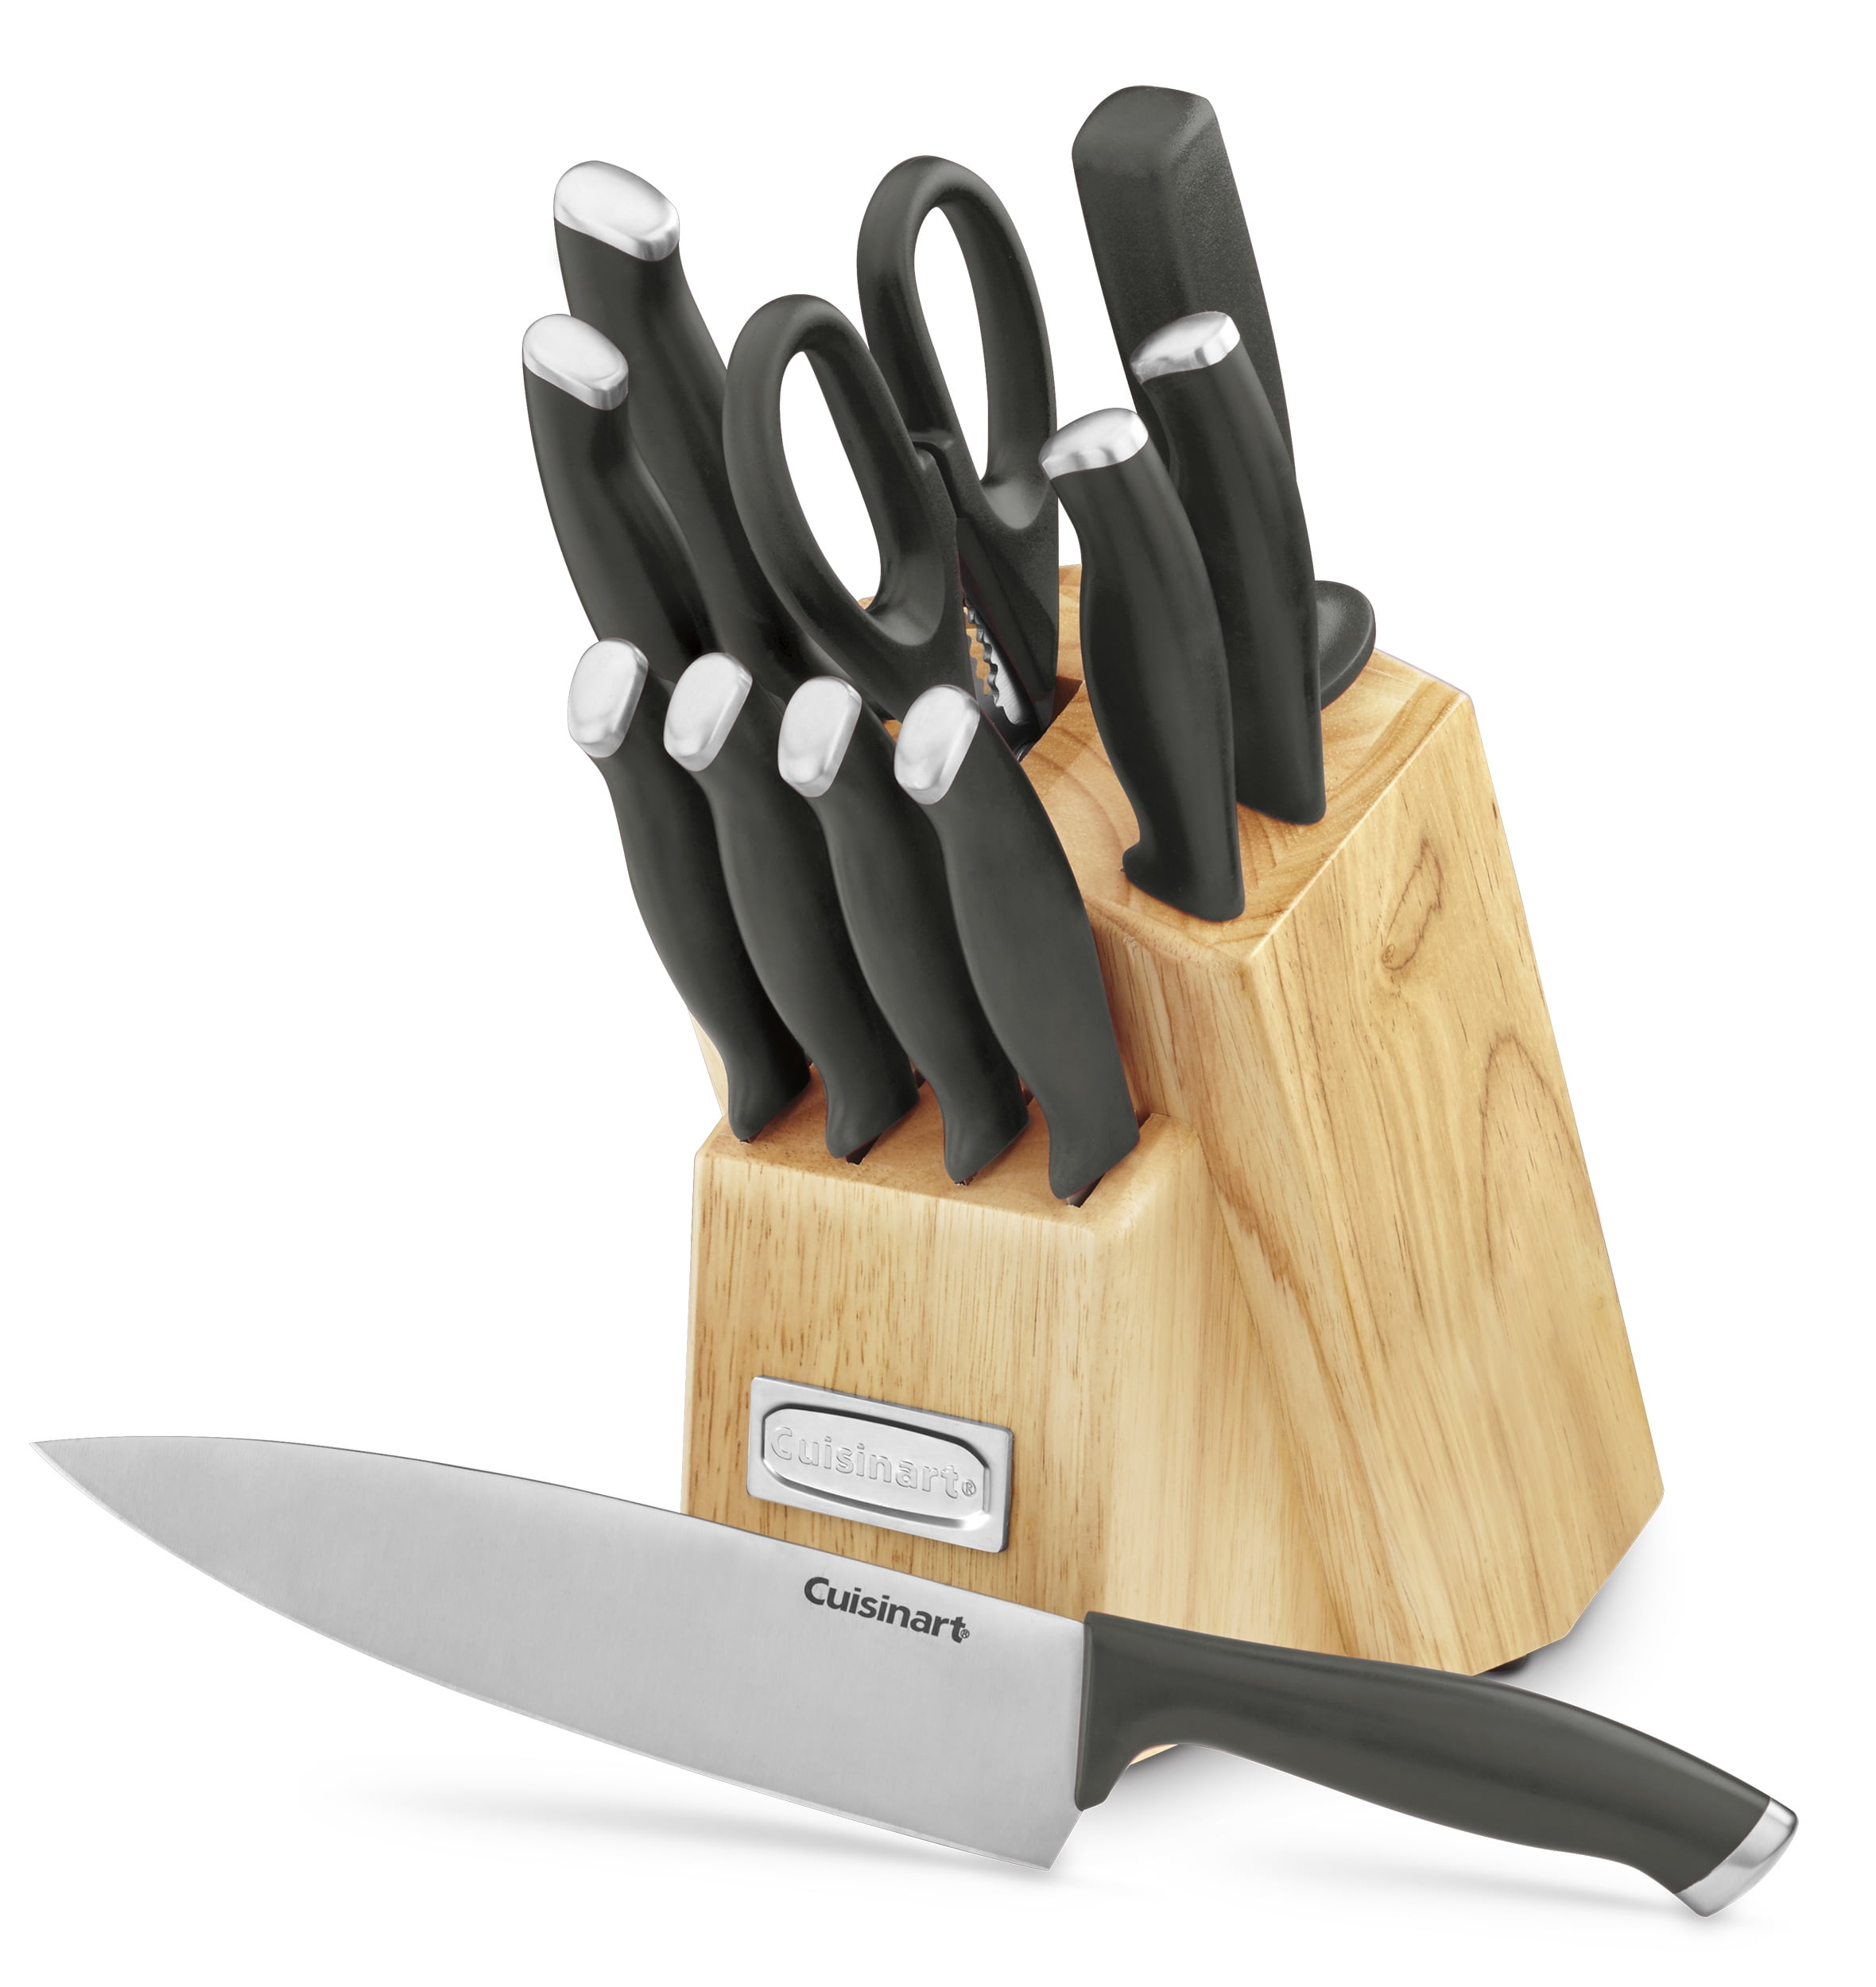  Cusinart Block Knife Set, 12pc Cutlery Knife Set with Steel  Blades for Precise Cutting, Lightweight, Stainless Steel, Durable &  Dishwasher Safe, C77SSW-12P: Home & Kitchen